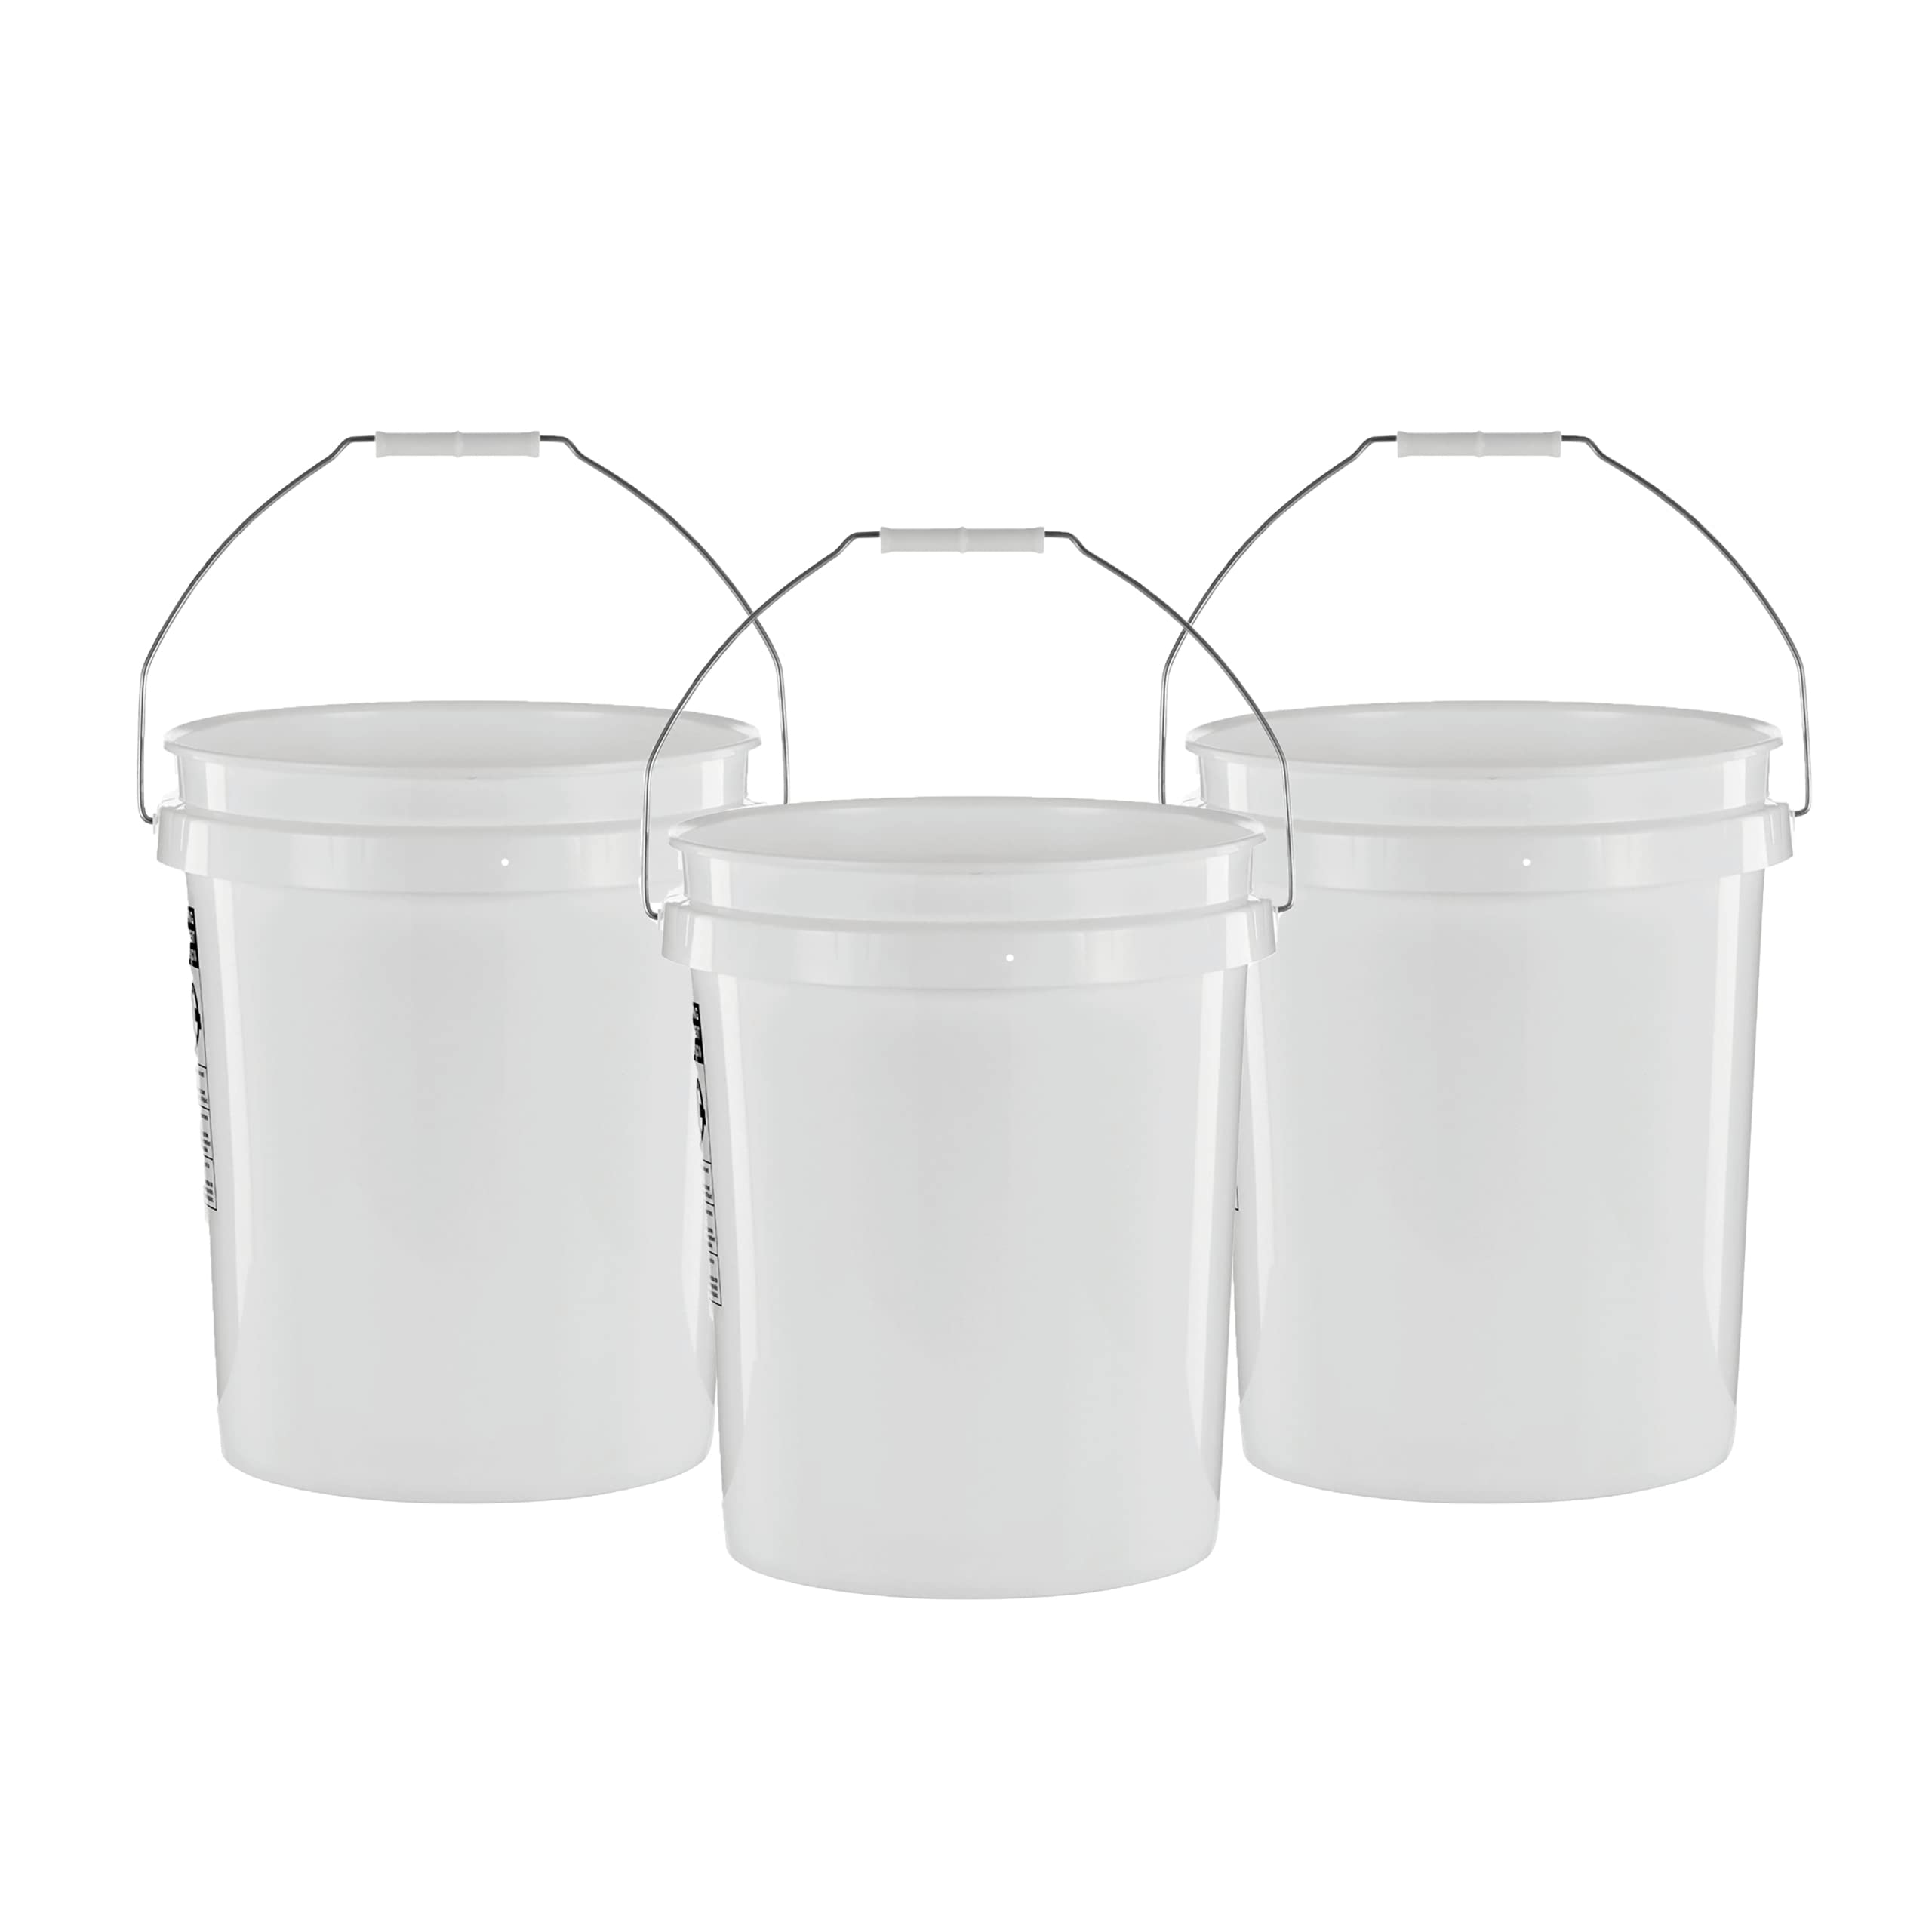 United Solutions 5 Gallon Bucket, Heavy Duty Plastic Bucket, Comfortable Handle, Easy to Clean, Perfect for on The Job, Home Improvement, or Household Cleaning; White, Pack of 3